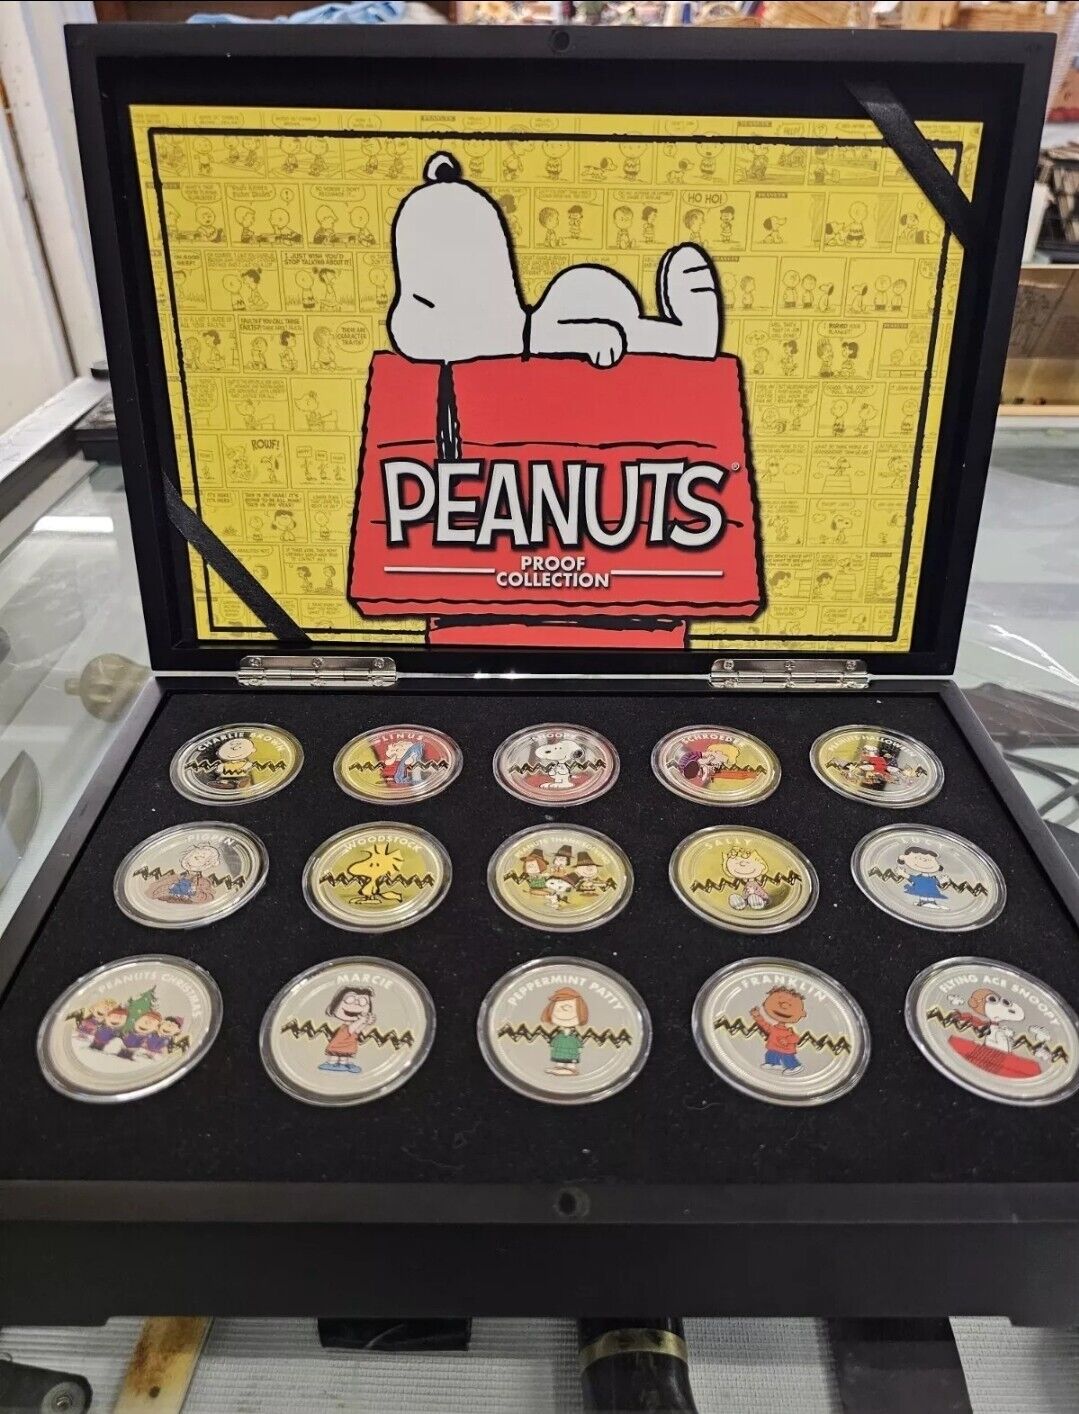 Limited Edition 70th Anniversary PEANUTS Silver-Plated Proof Collection